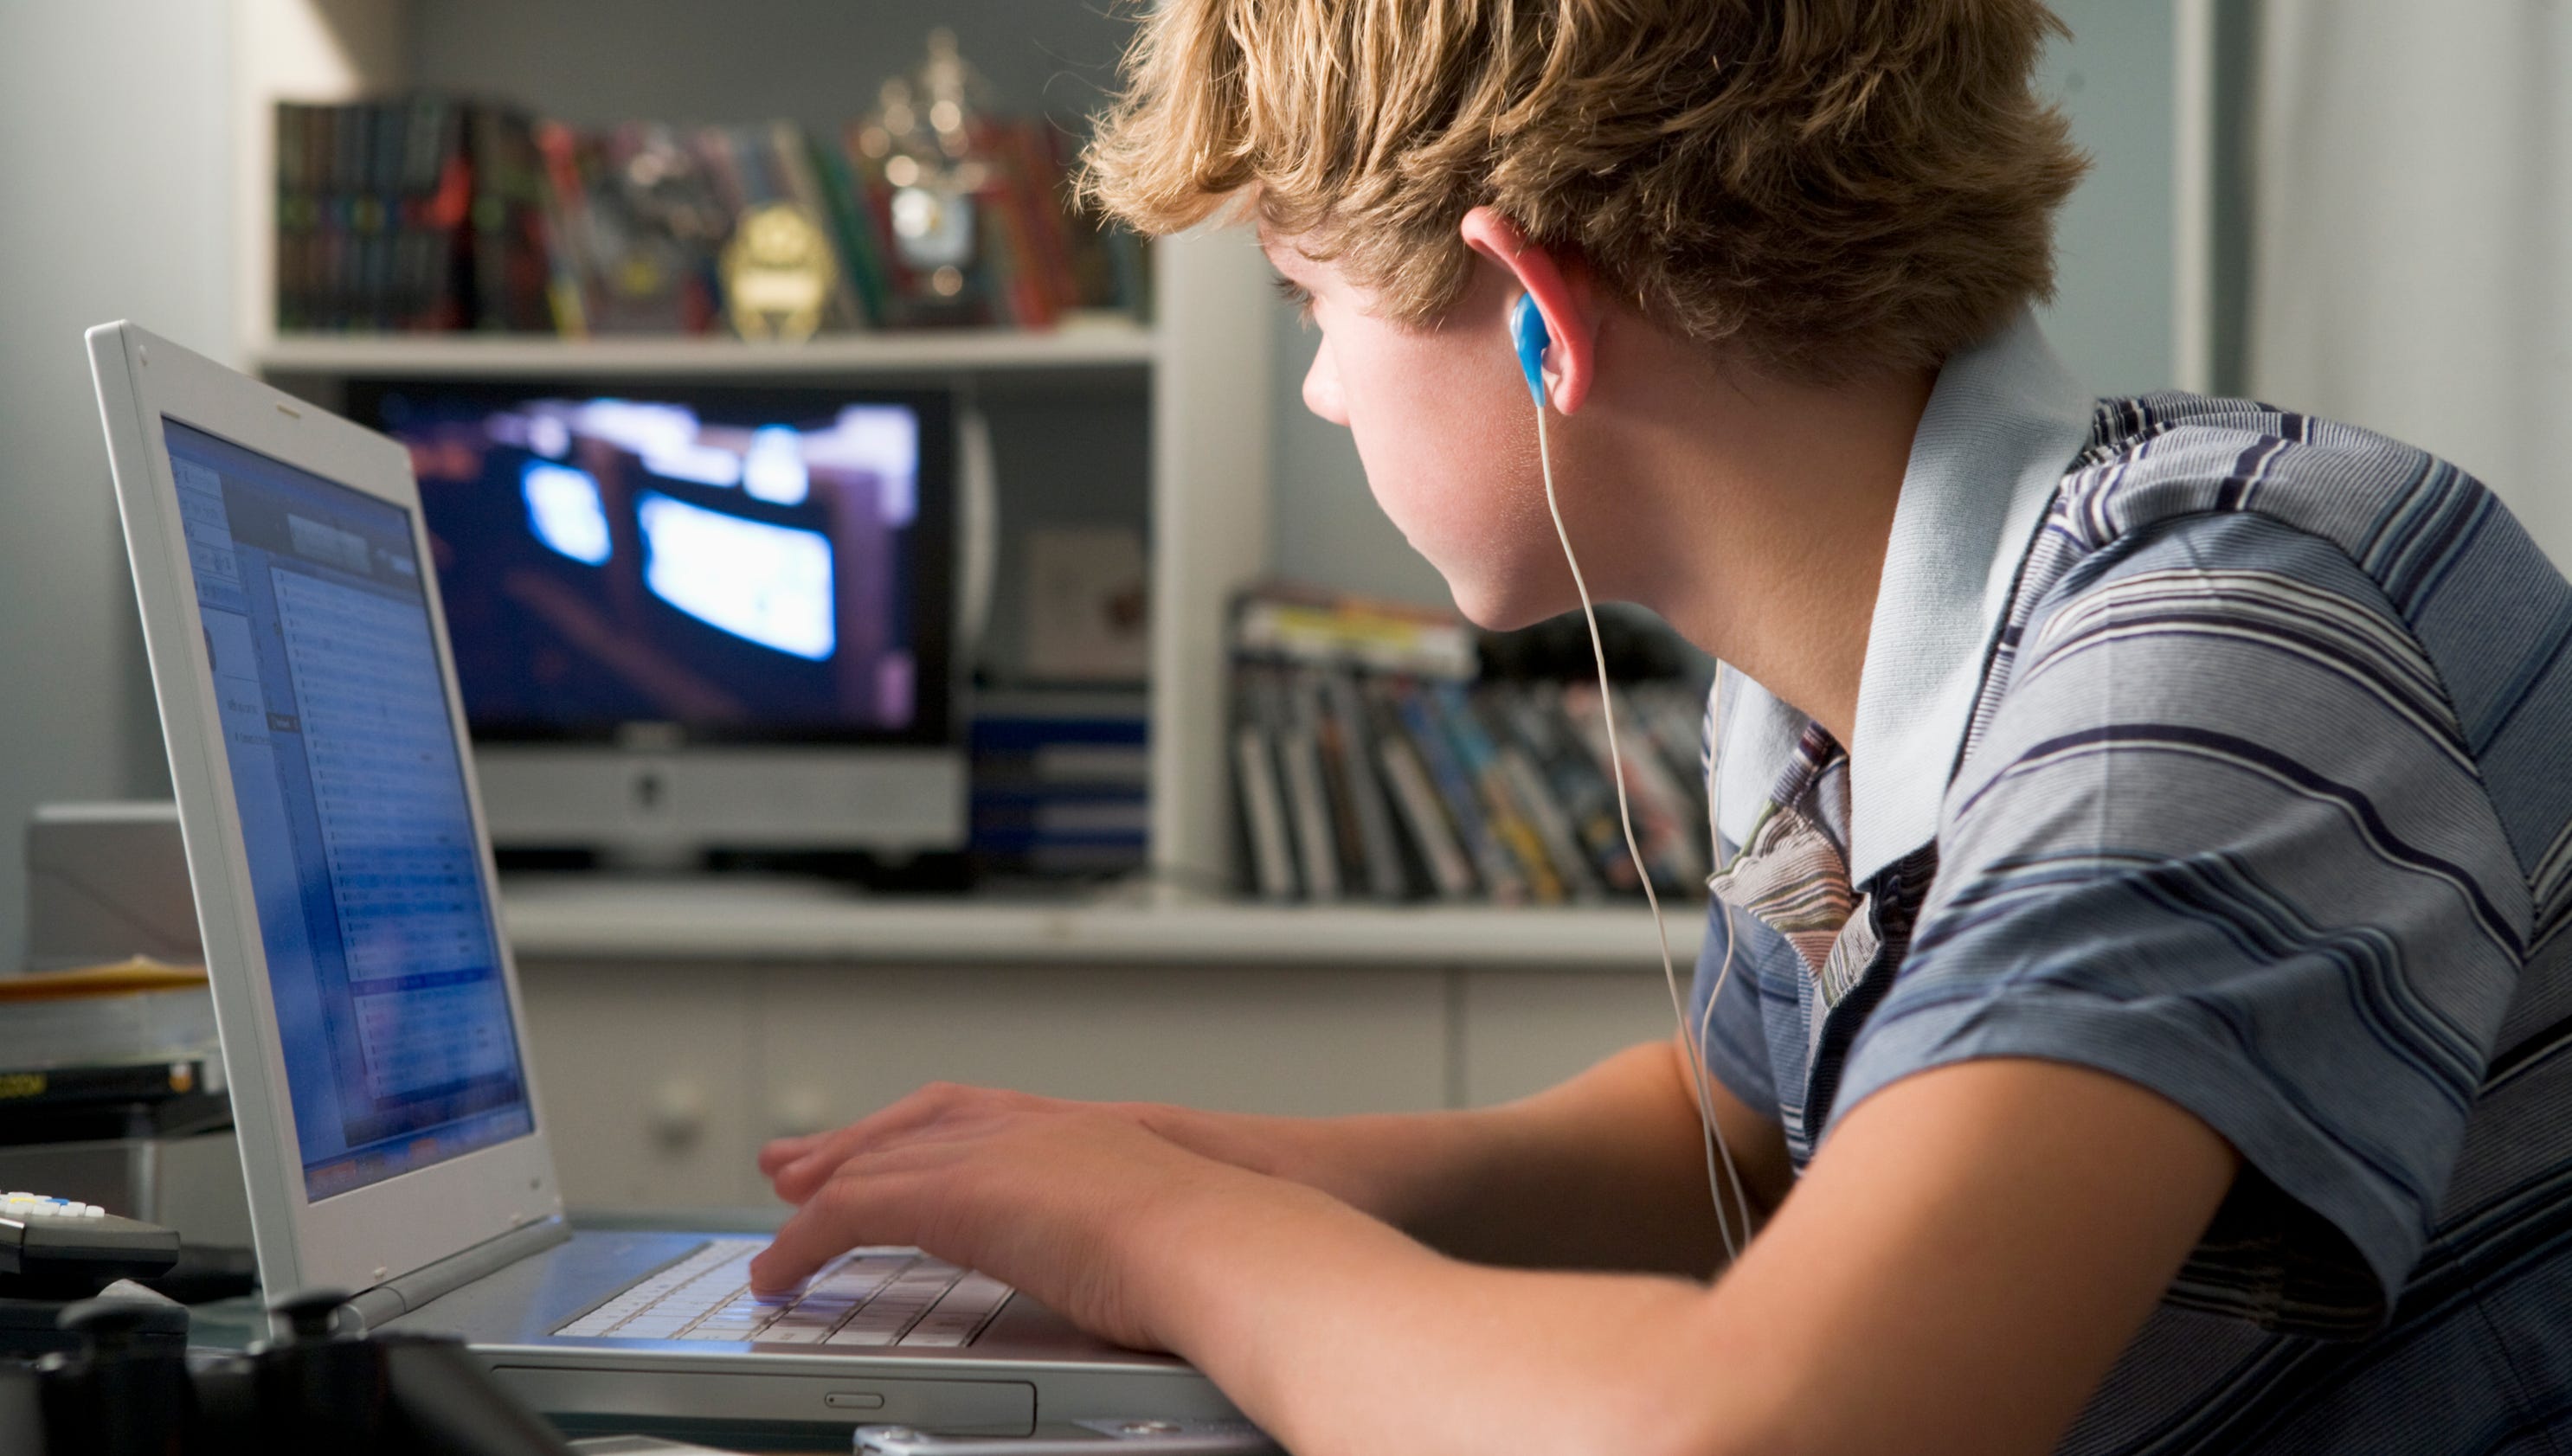 About 1 In 4 Young Teens Meet Screentime Guidelines